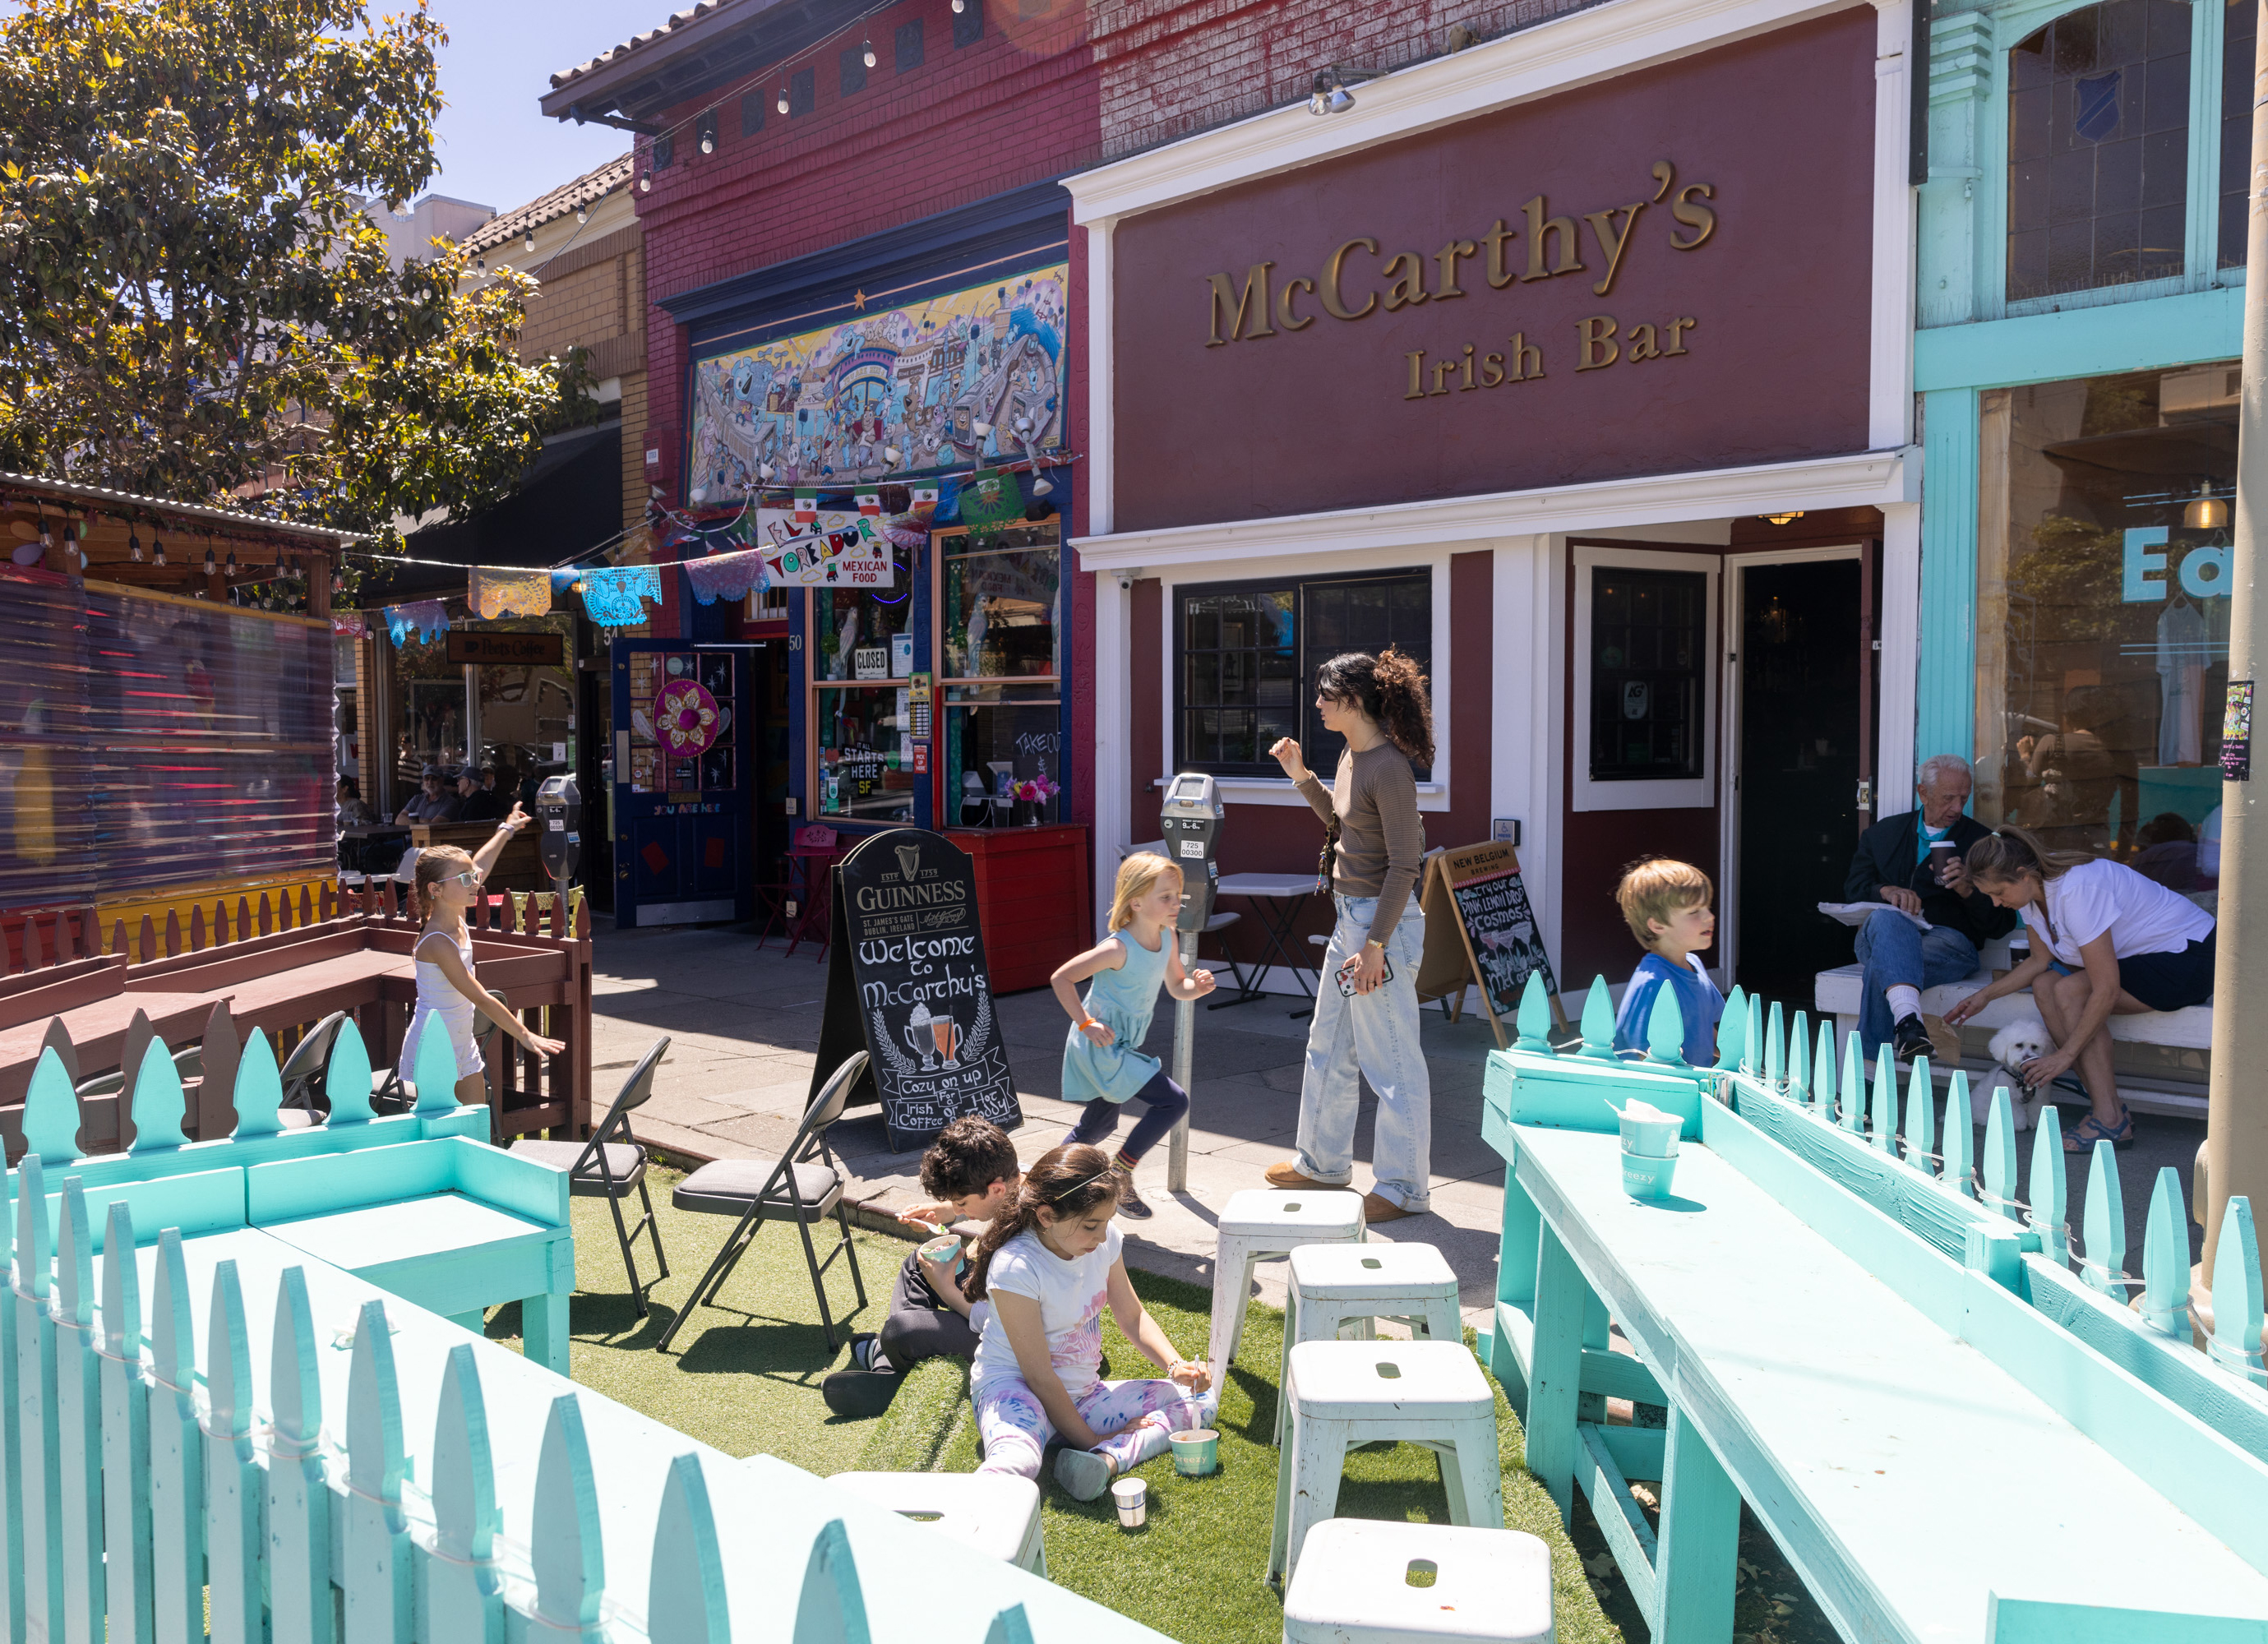 Children and adults socialize outside McCarthy's Irish Bar. Bright decor, a blue fence with benches, and colorful storefronts add vibrant energy to the street scene.